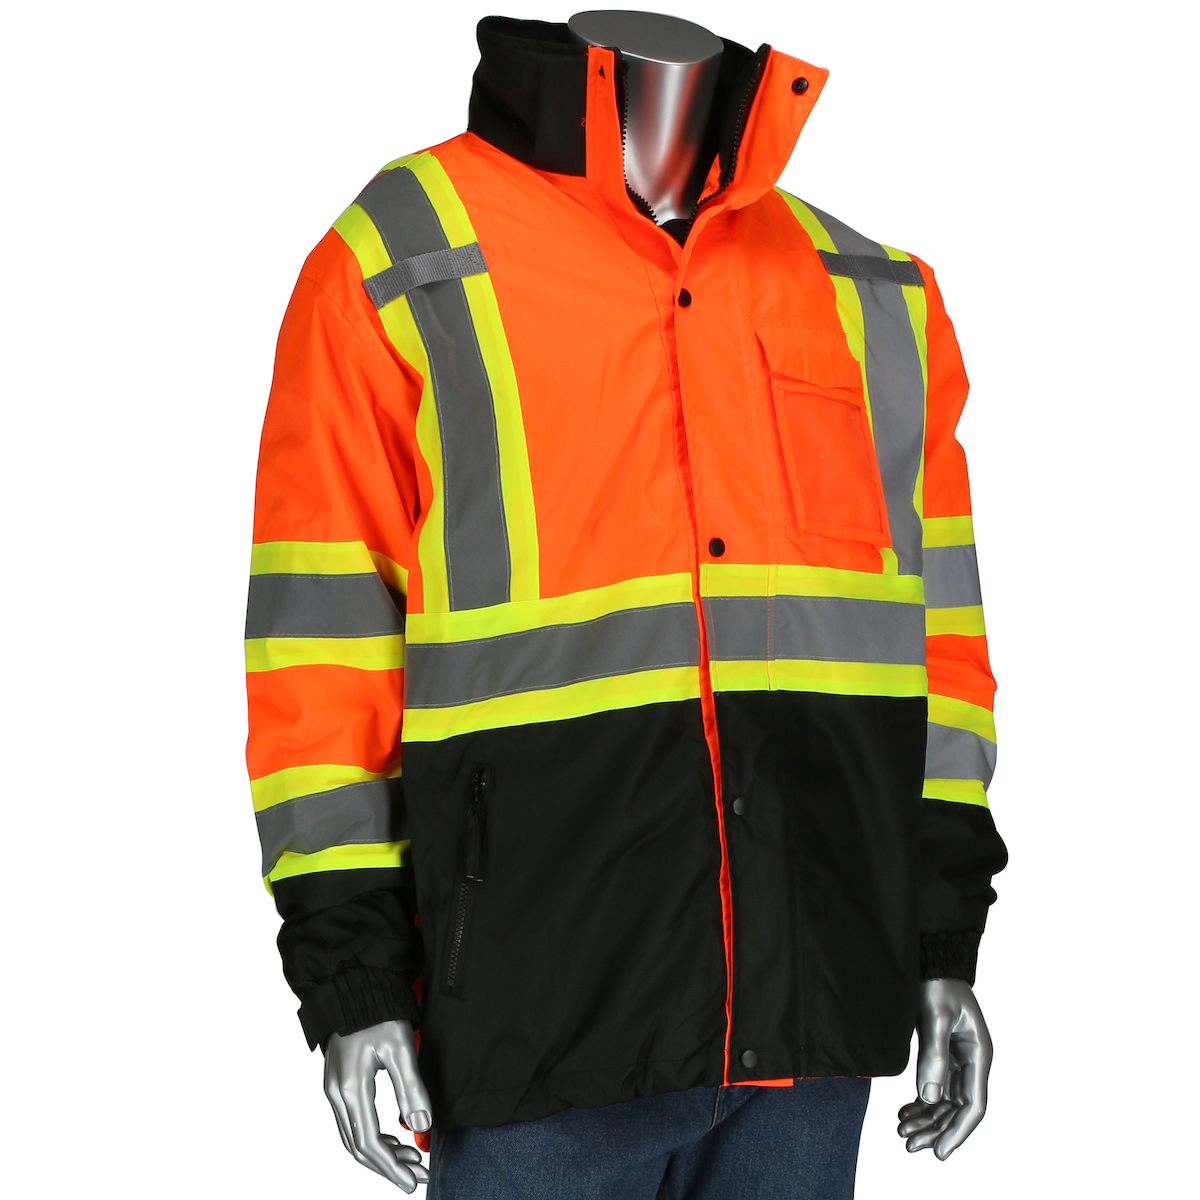 3 IN 1 CLASS 3 RIPSTOP TWO TONE JACKET WITH REMOVABLE GRID FLEECE INNER JACKET